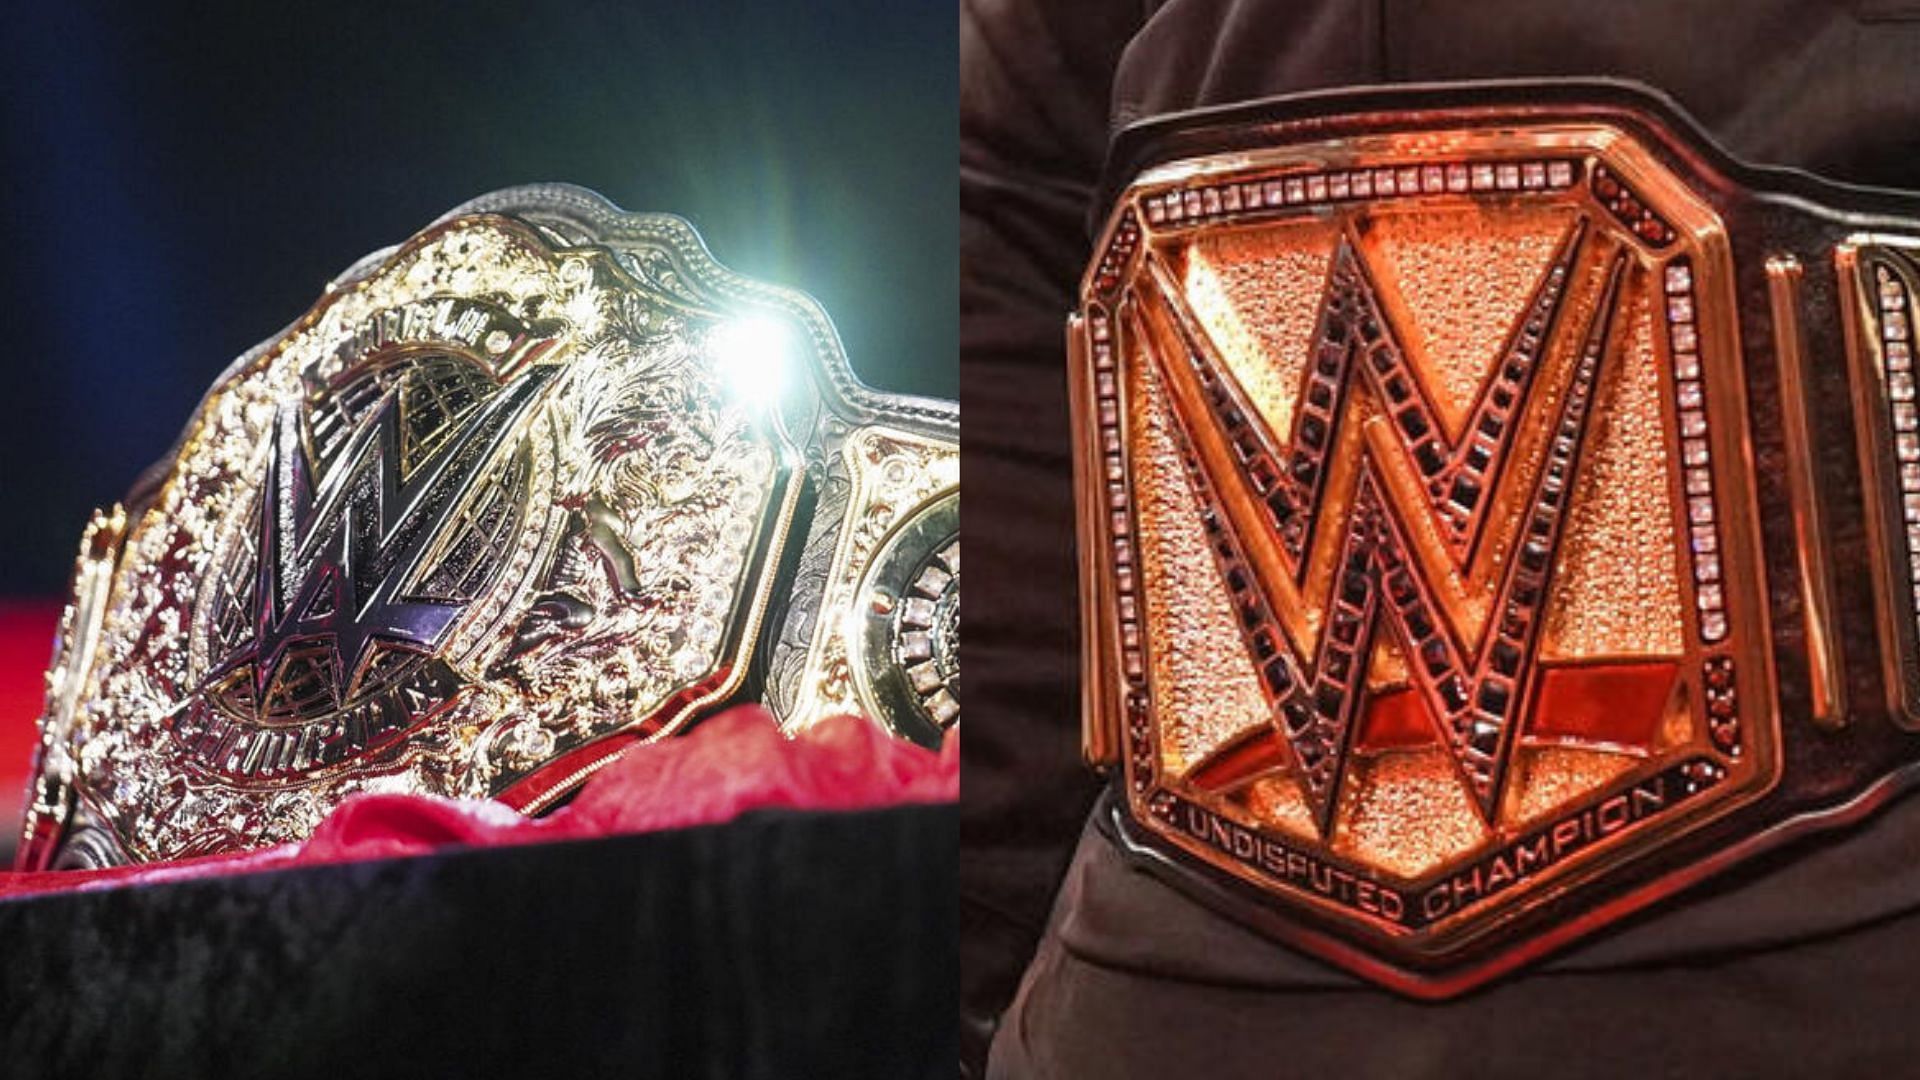 WWE has introduced new titles under a new regime!